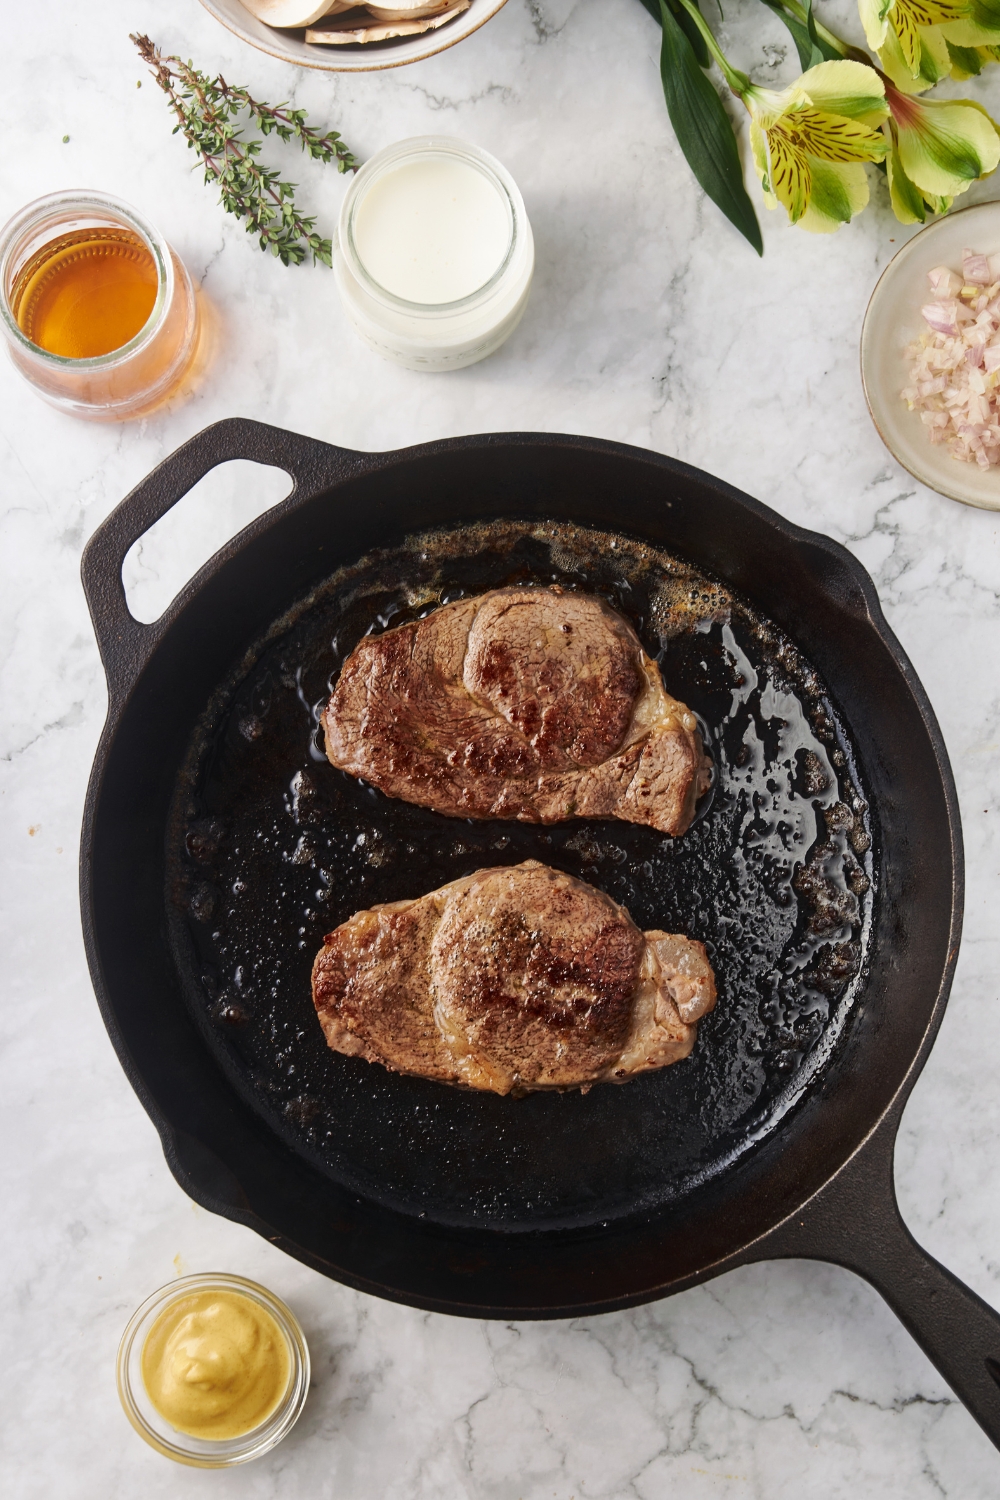 Two seared filet mignon steaks in a cast iron skillet with melted butter.